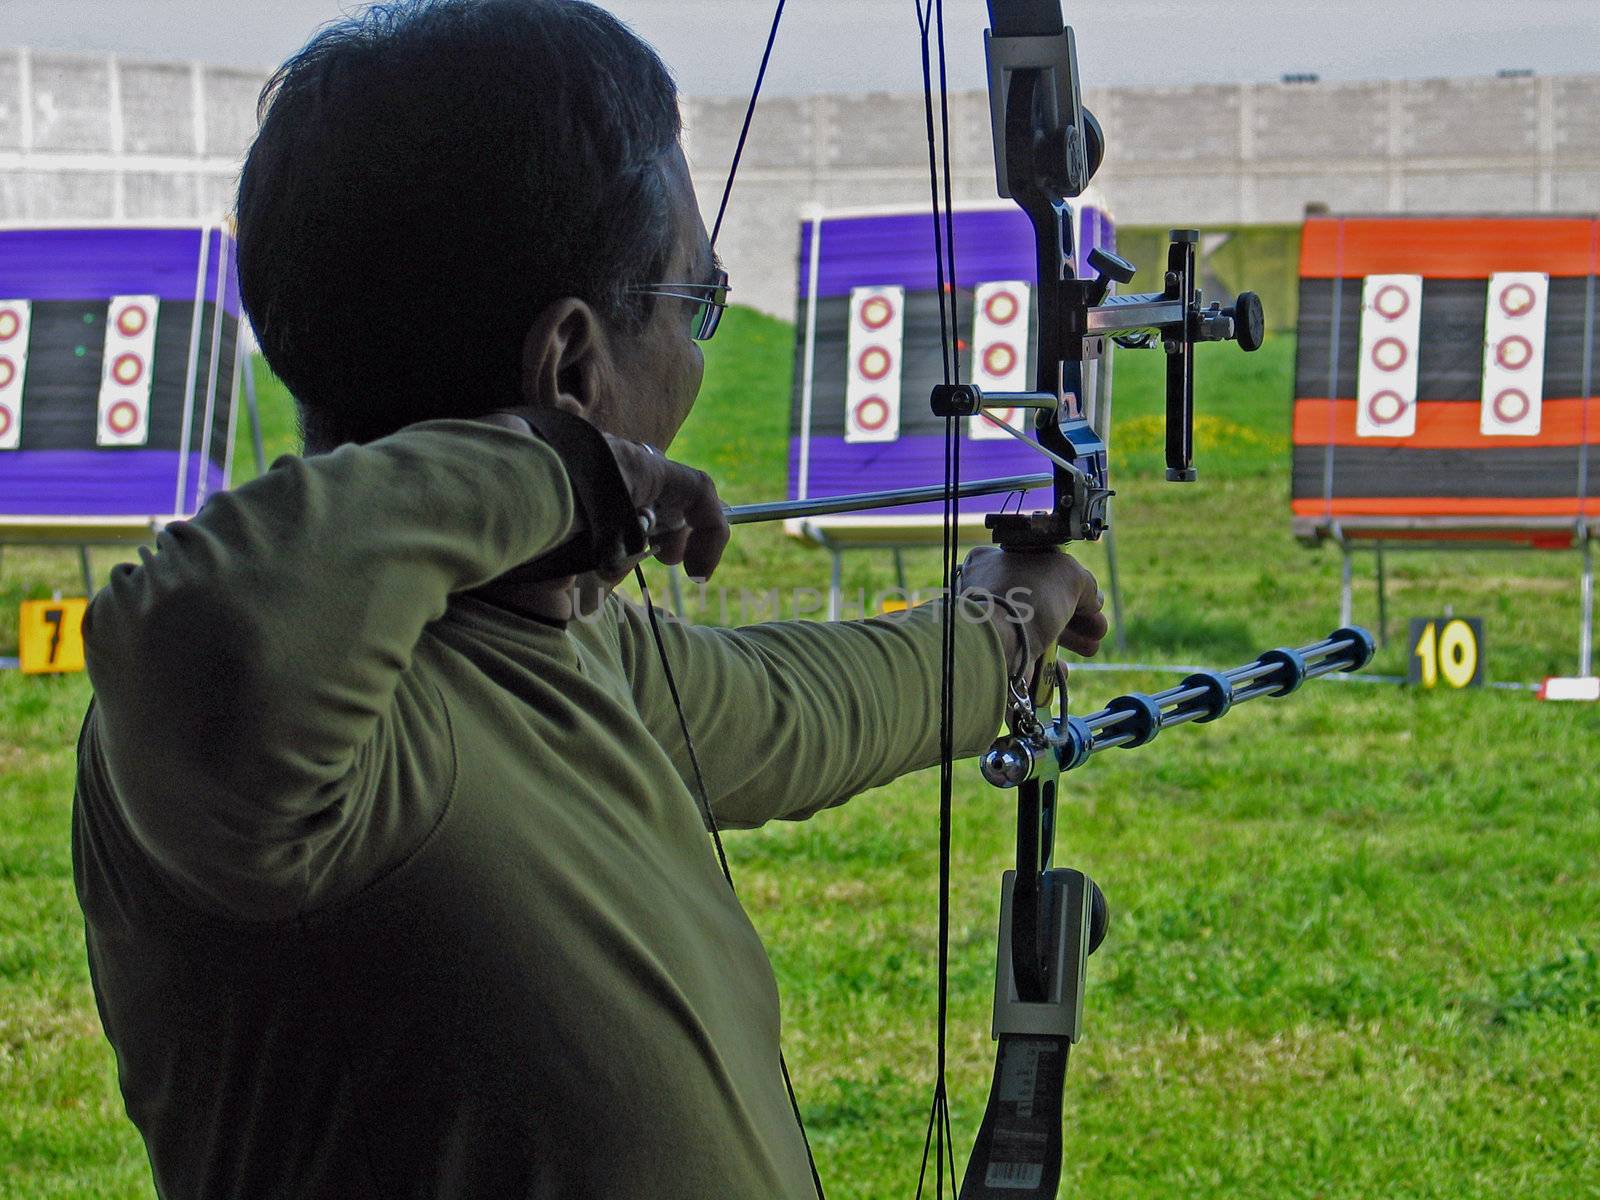 An archer shooting compound bow in archery competition